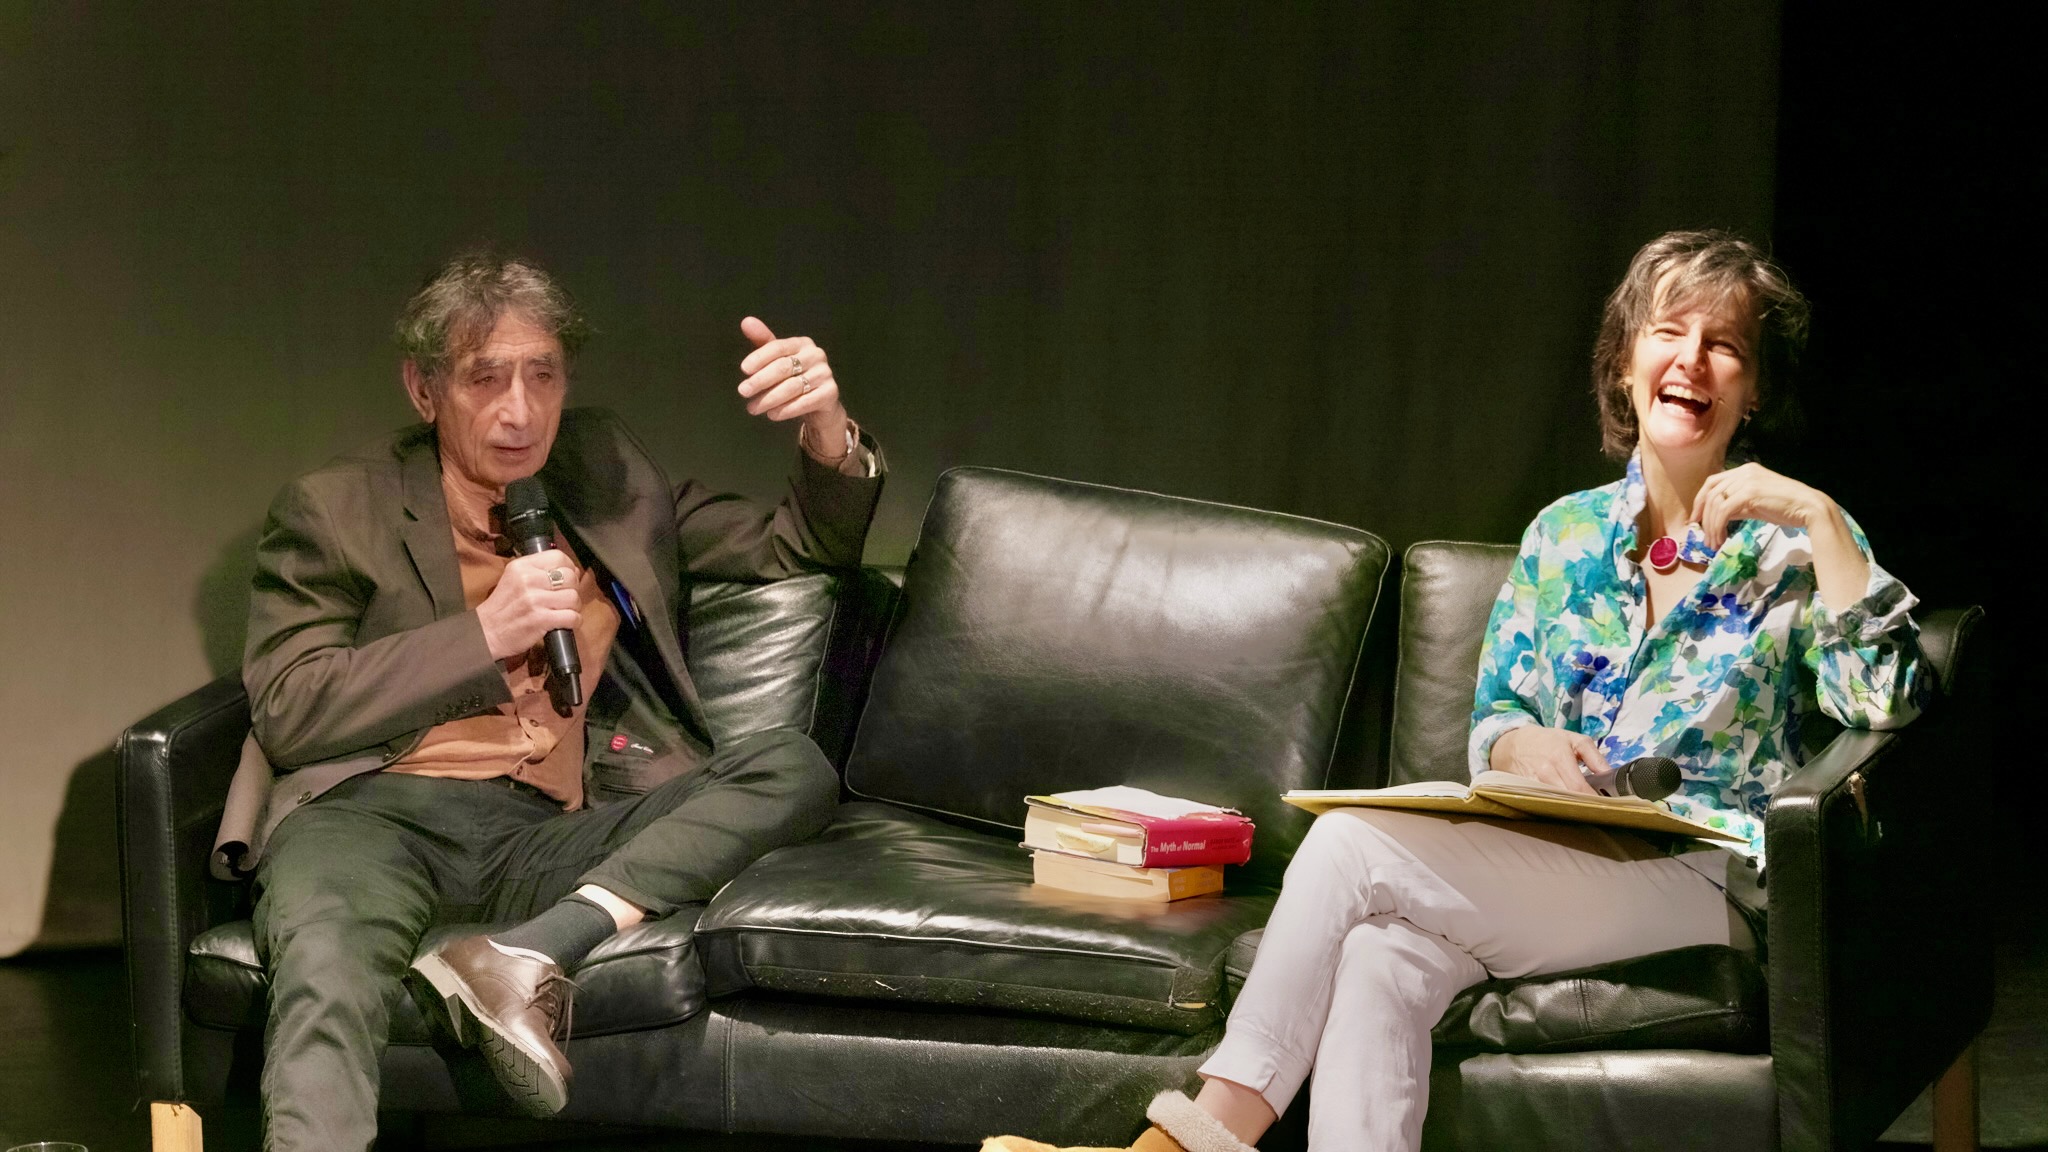 Gabor Mate and Samantha Graham from State of Mind at the play Adaptation: Enough Already